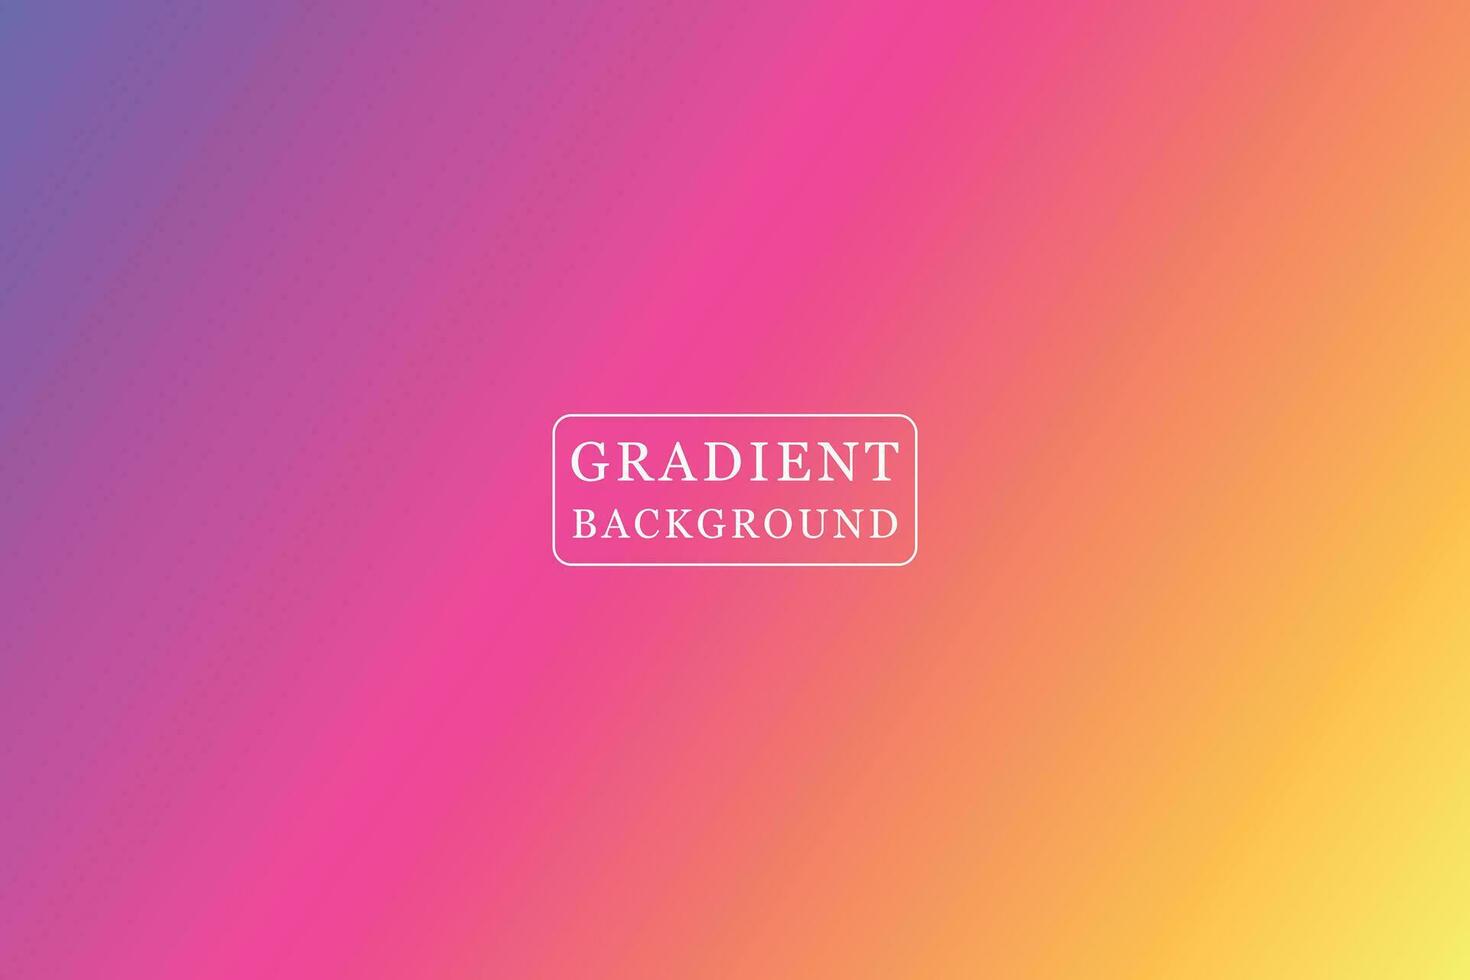 Abstract colorful vector gradient background, illustration with Smooth gradient background design for banners, ads, and presentation templates